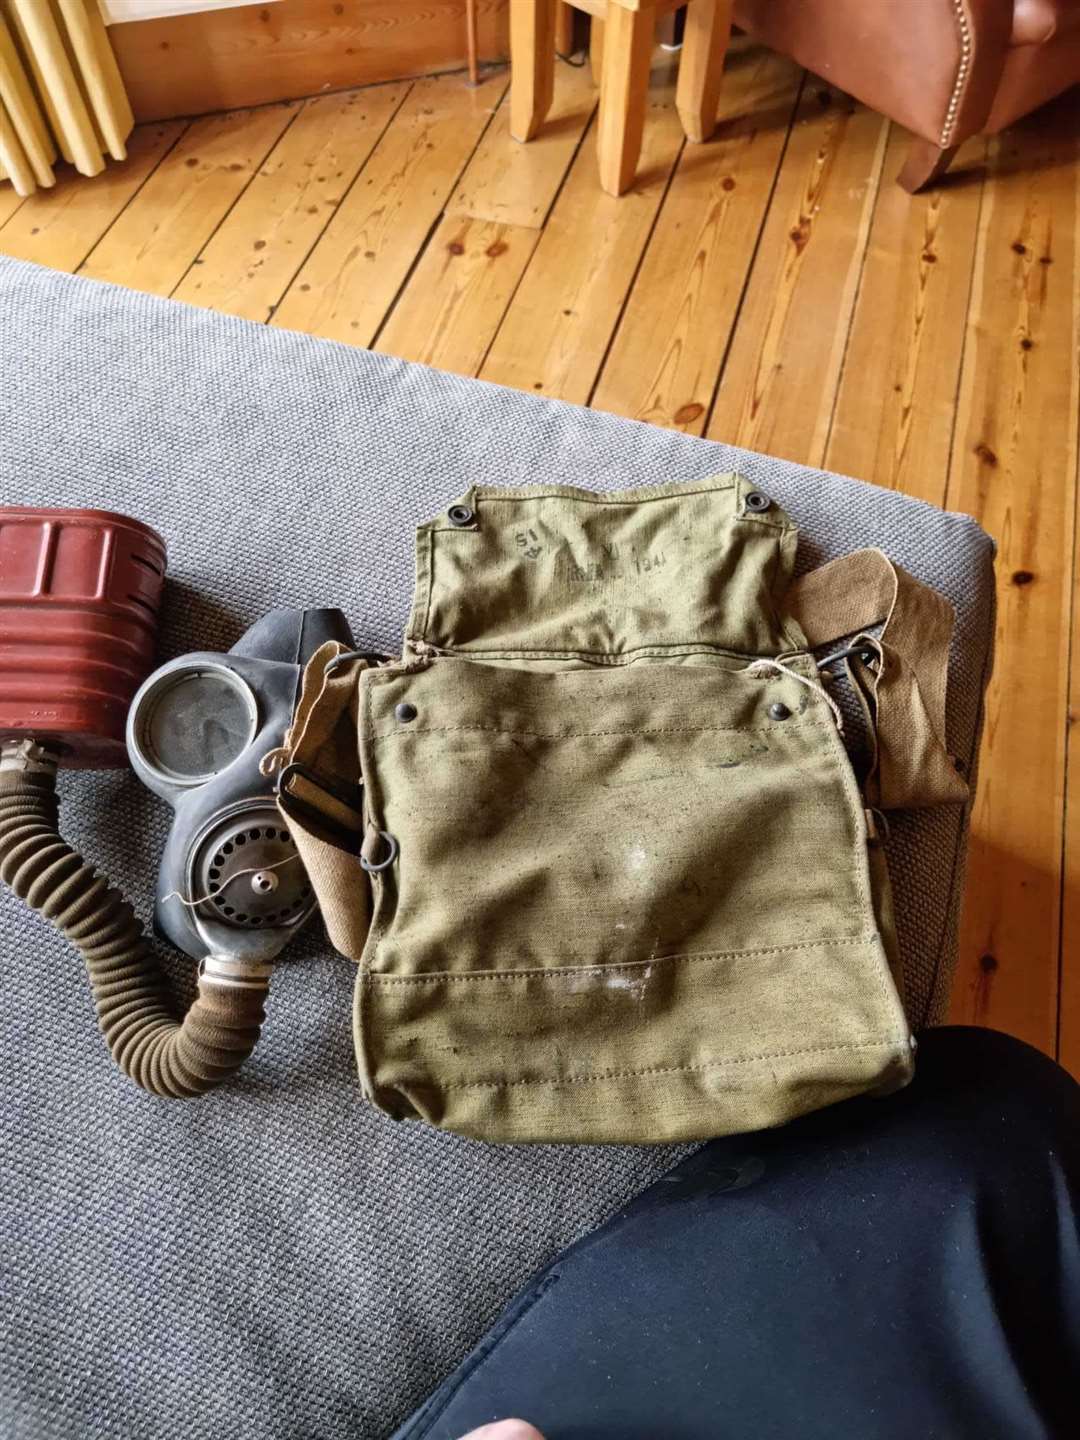 The Second World War gas mask and items found in the loft by Shayne MacDonald.